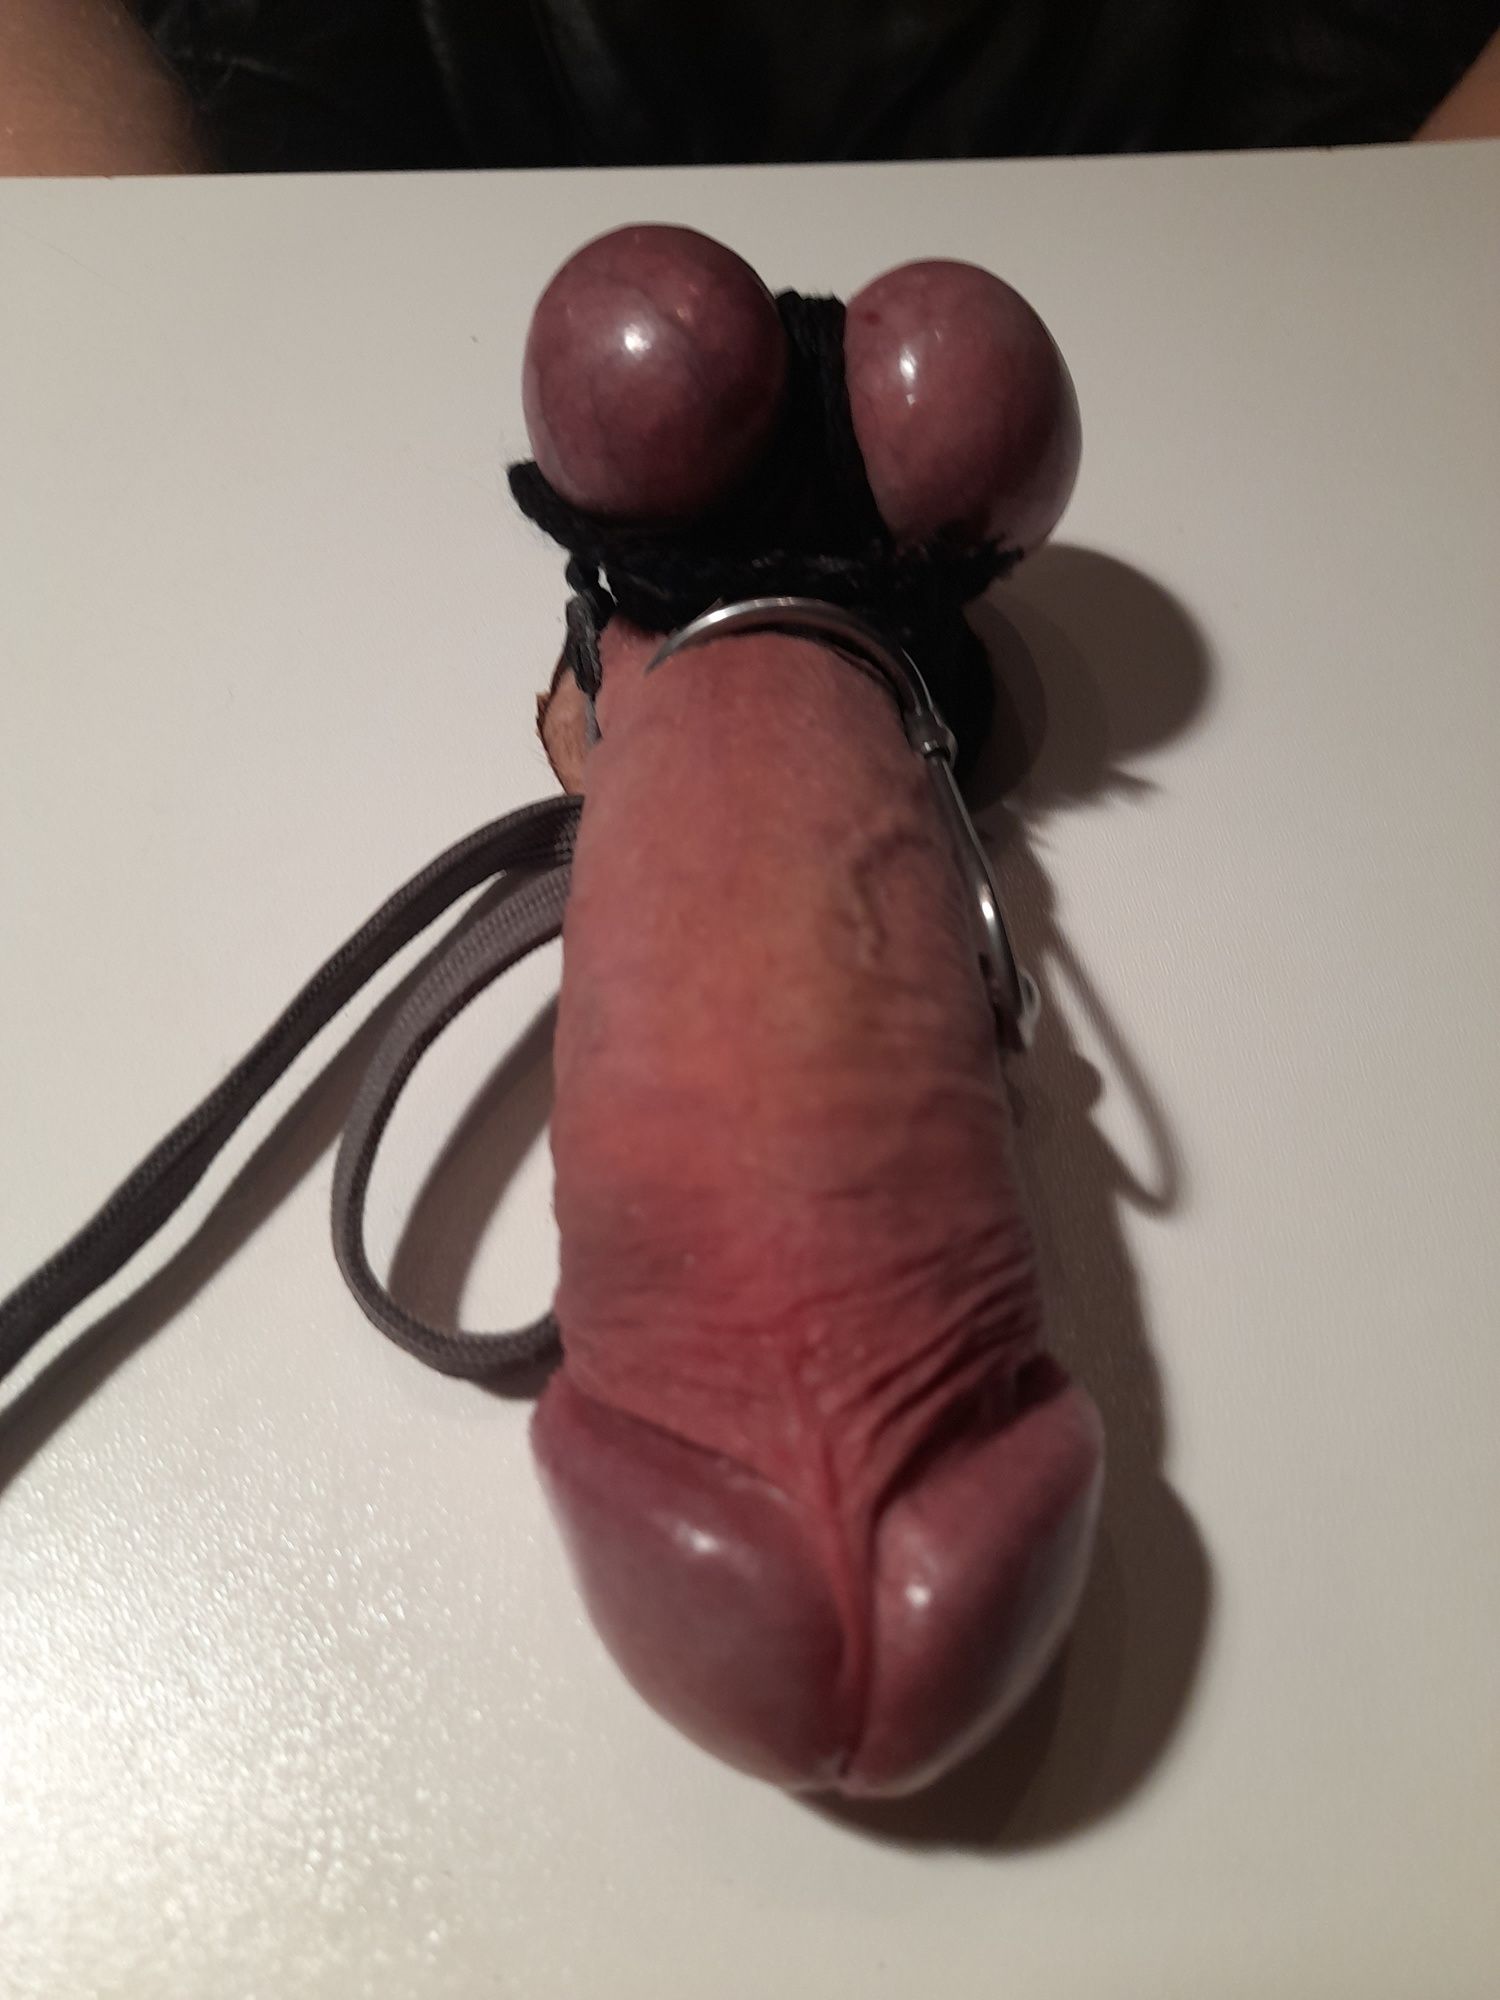 many pics of my cock #10